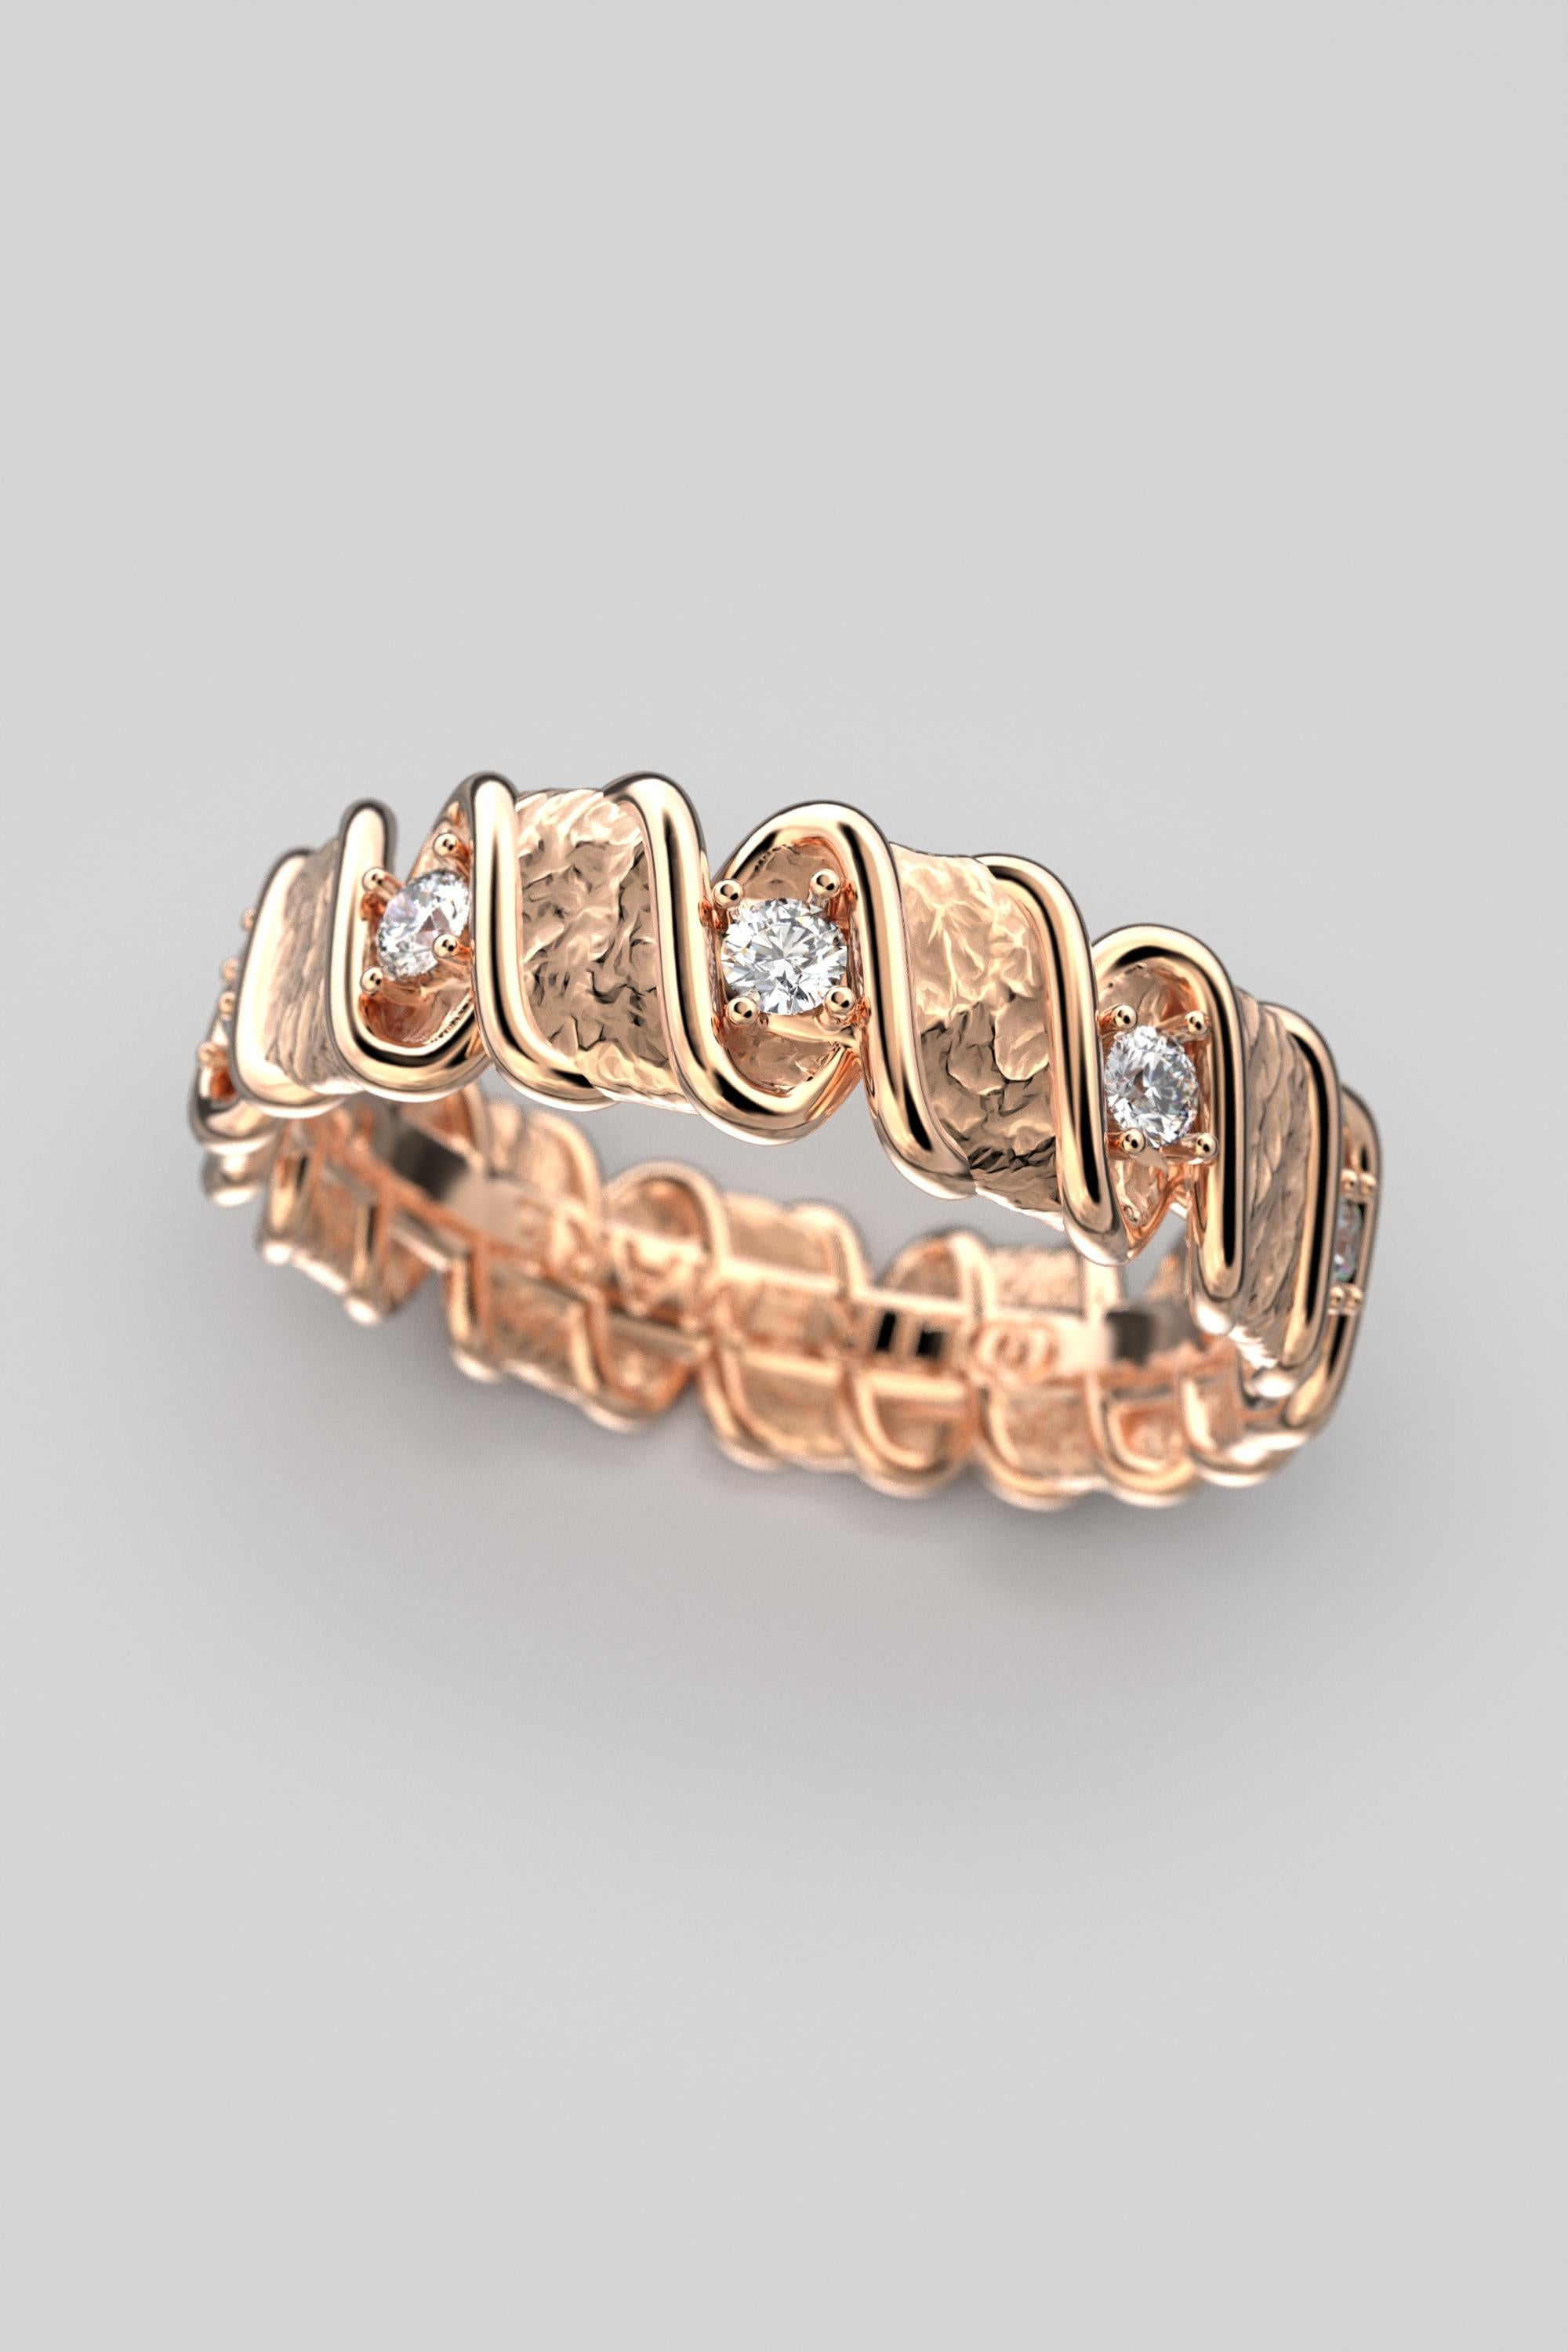 For Sale:  Italian Diamond Eternity Gold Band Made in Italy in 18k By Oltremare Gioielli 7